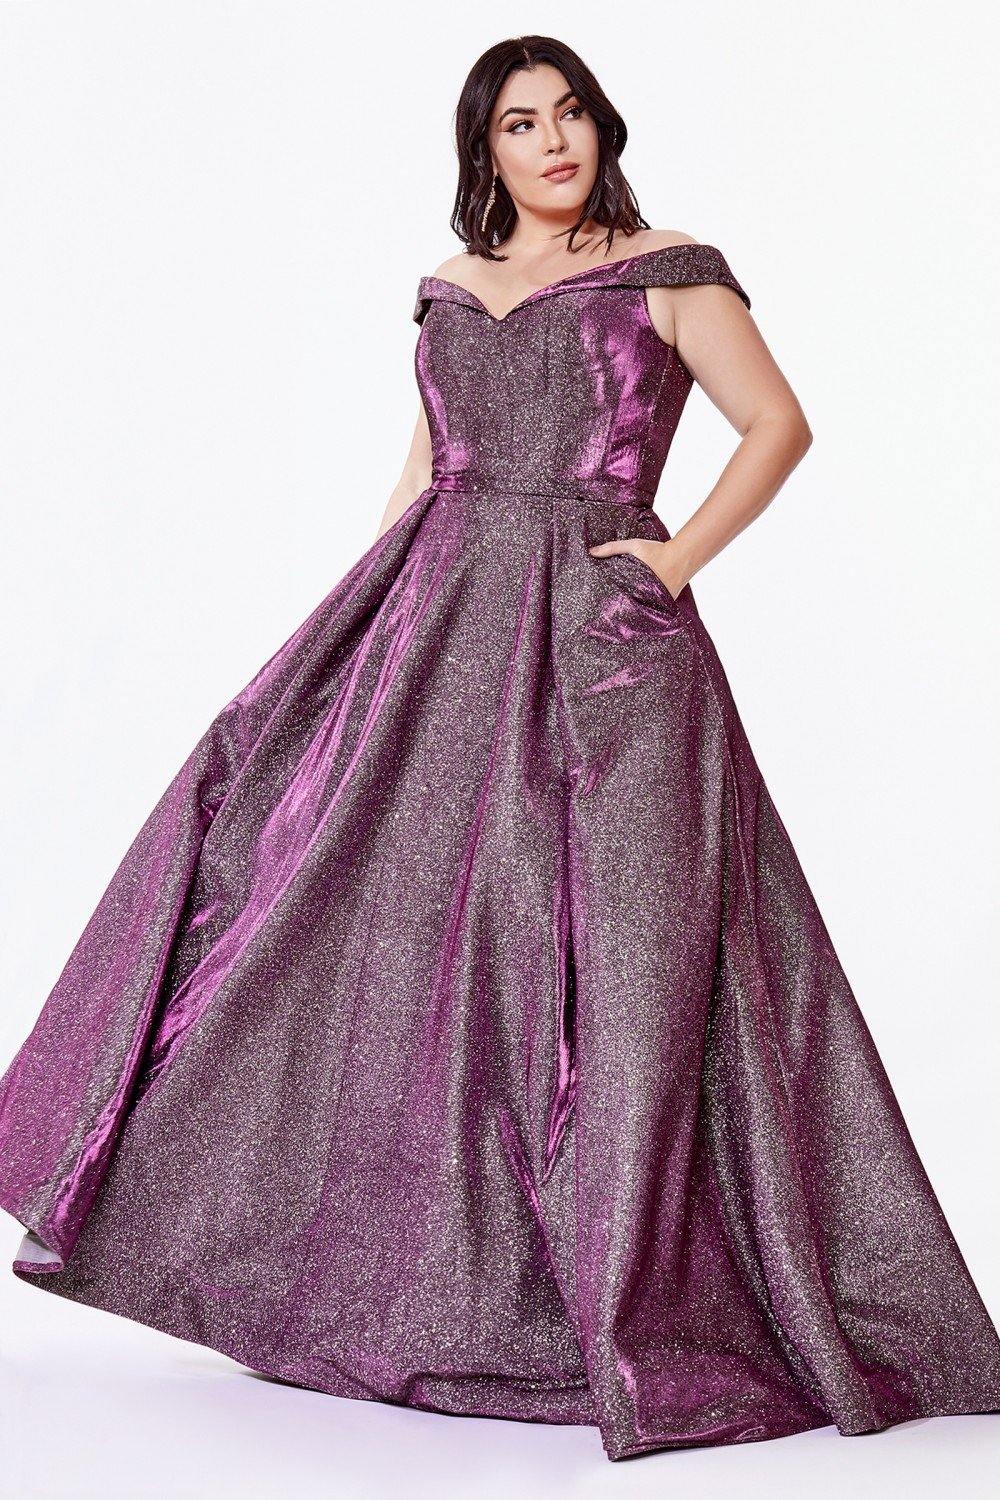 Long Off Shoulder Prom Glitter Metallic Ball Gown - The Dress Outlet